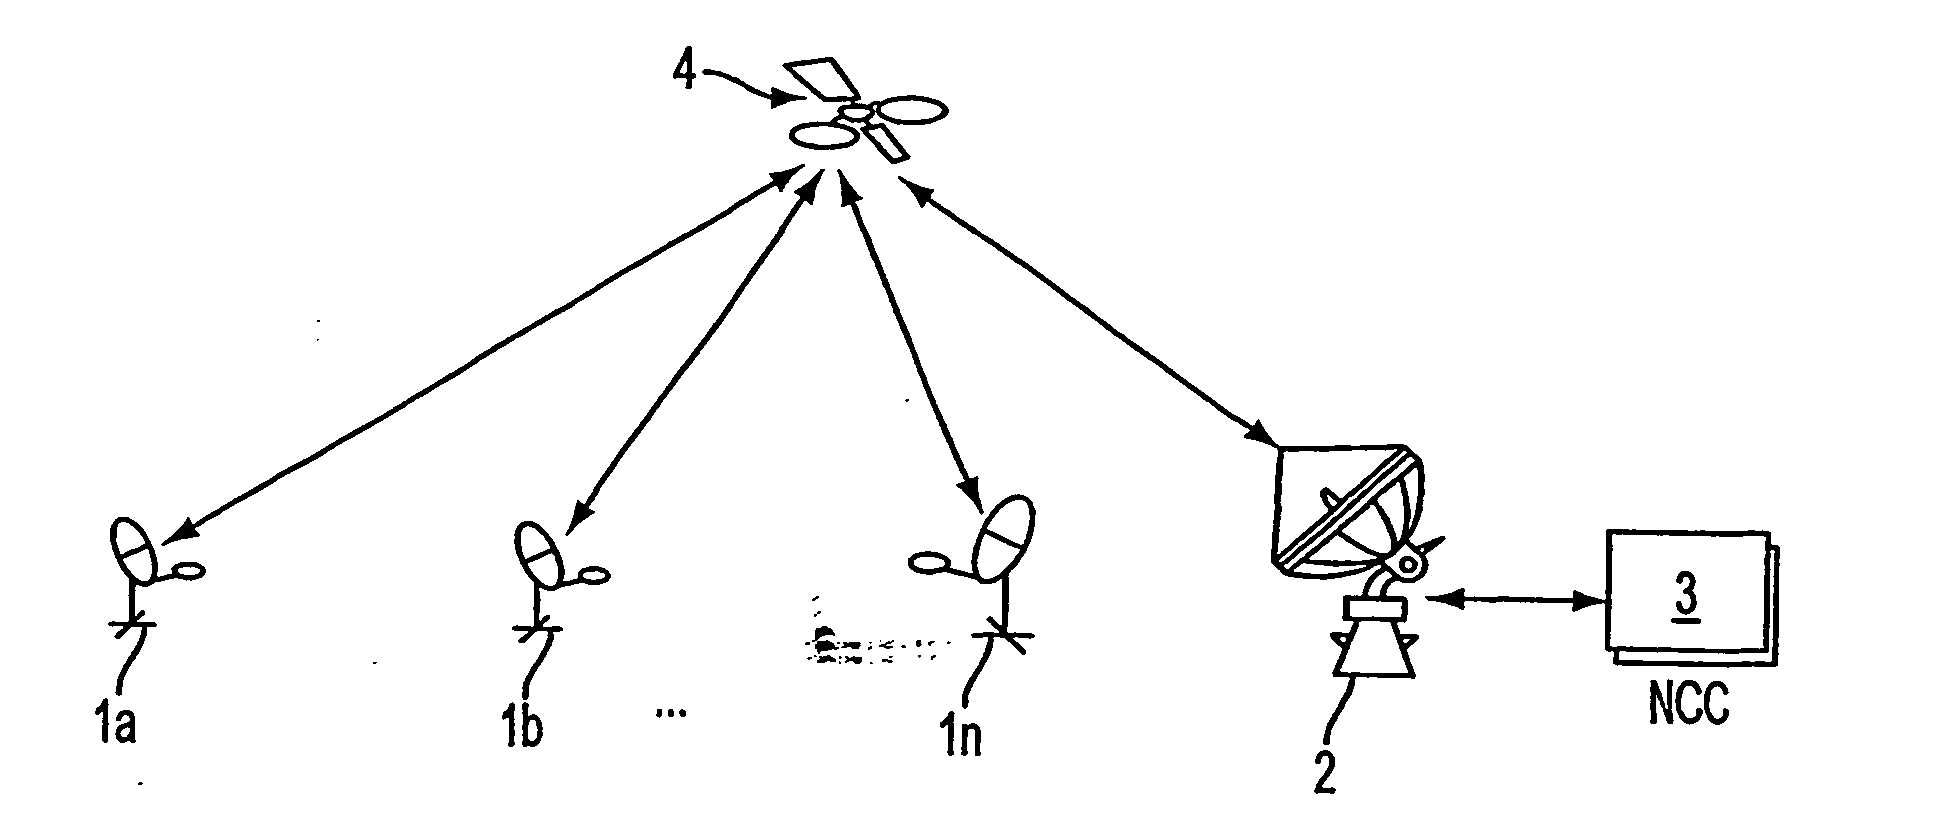 Method for dynamic load management of random access shared communications channels